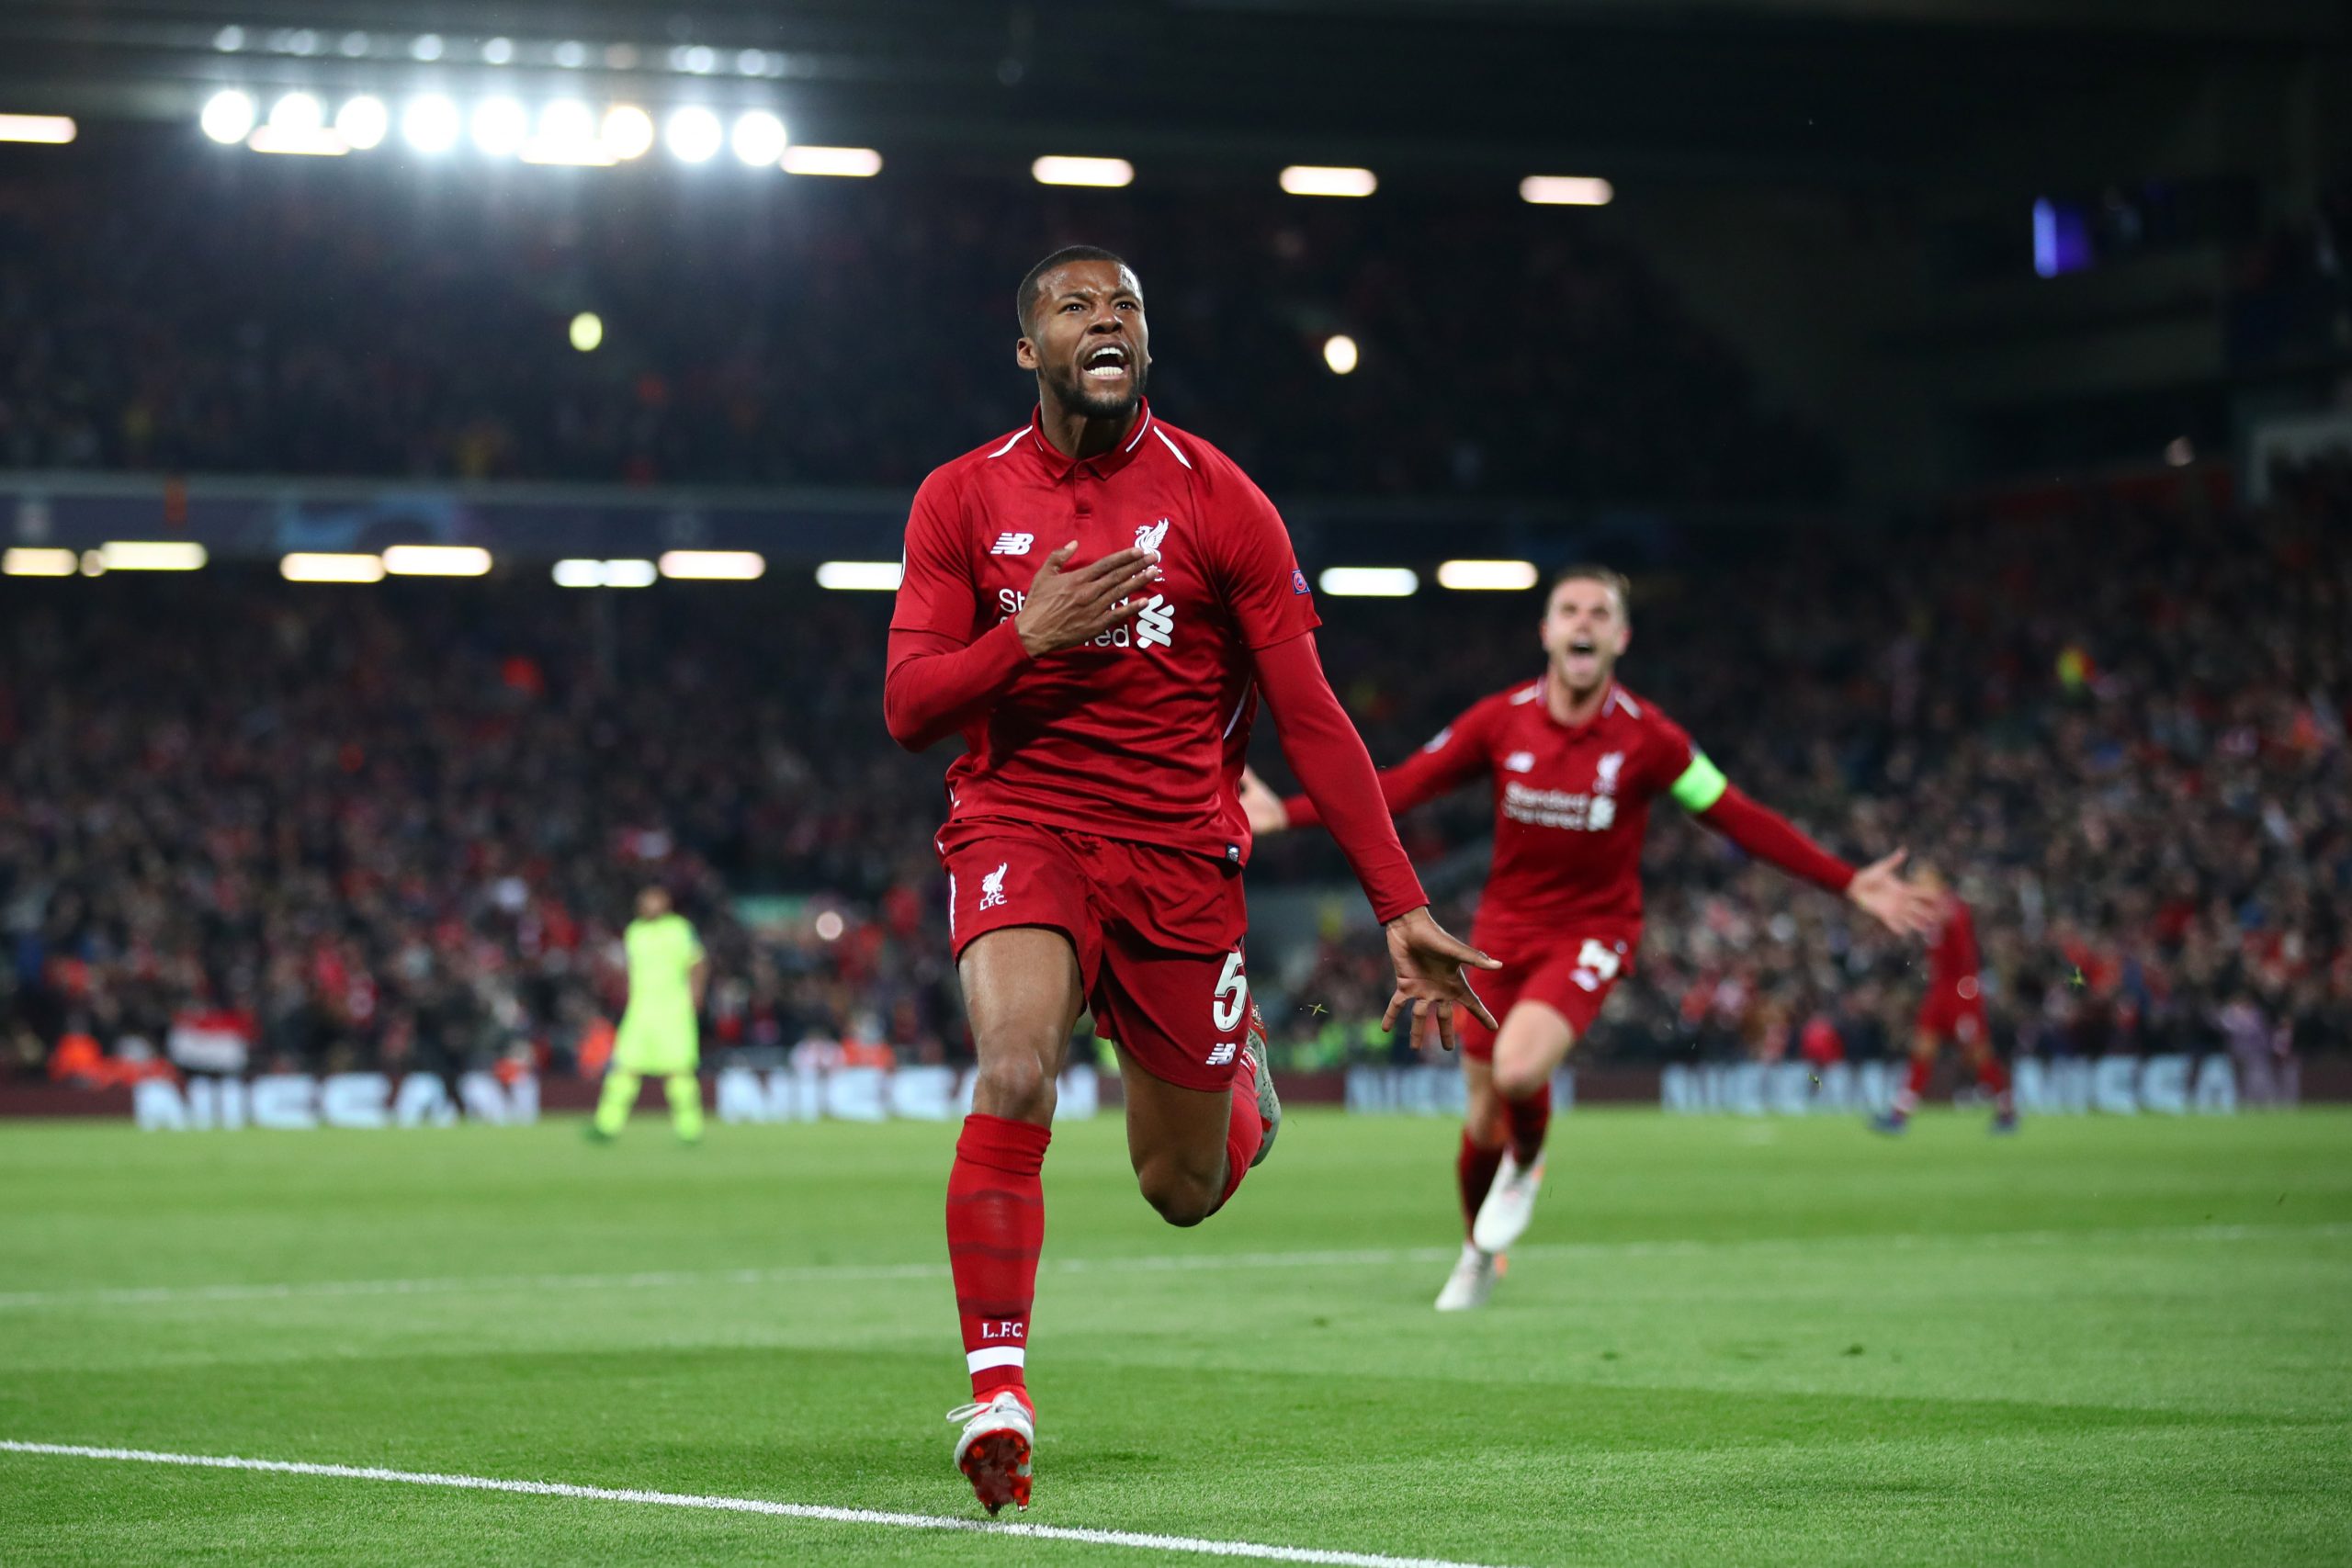 Liverpool midfielder Georginio Wijnaldum is yet to sign a new contract with the club. 